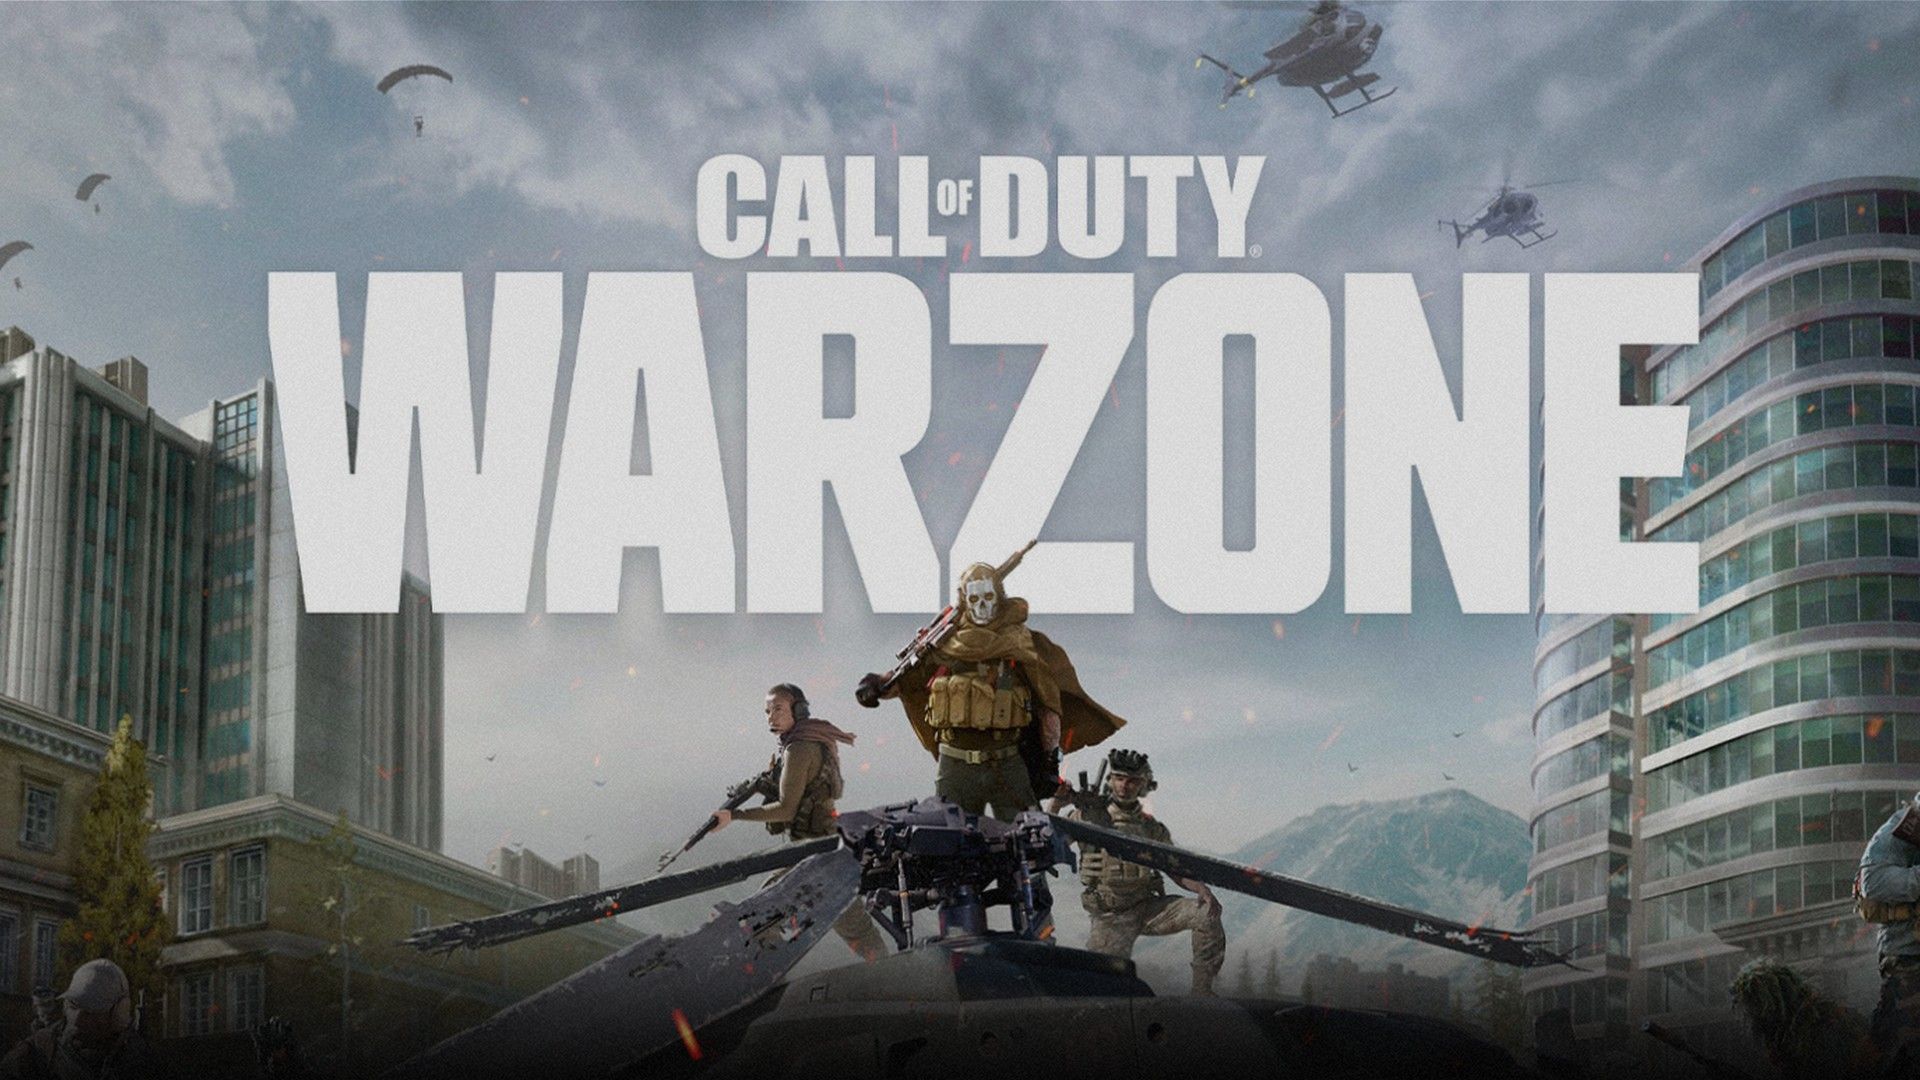 Call Of Duty: Warzone Wallpaper Free Call Of Duty: Warzone